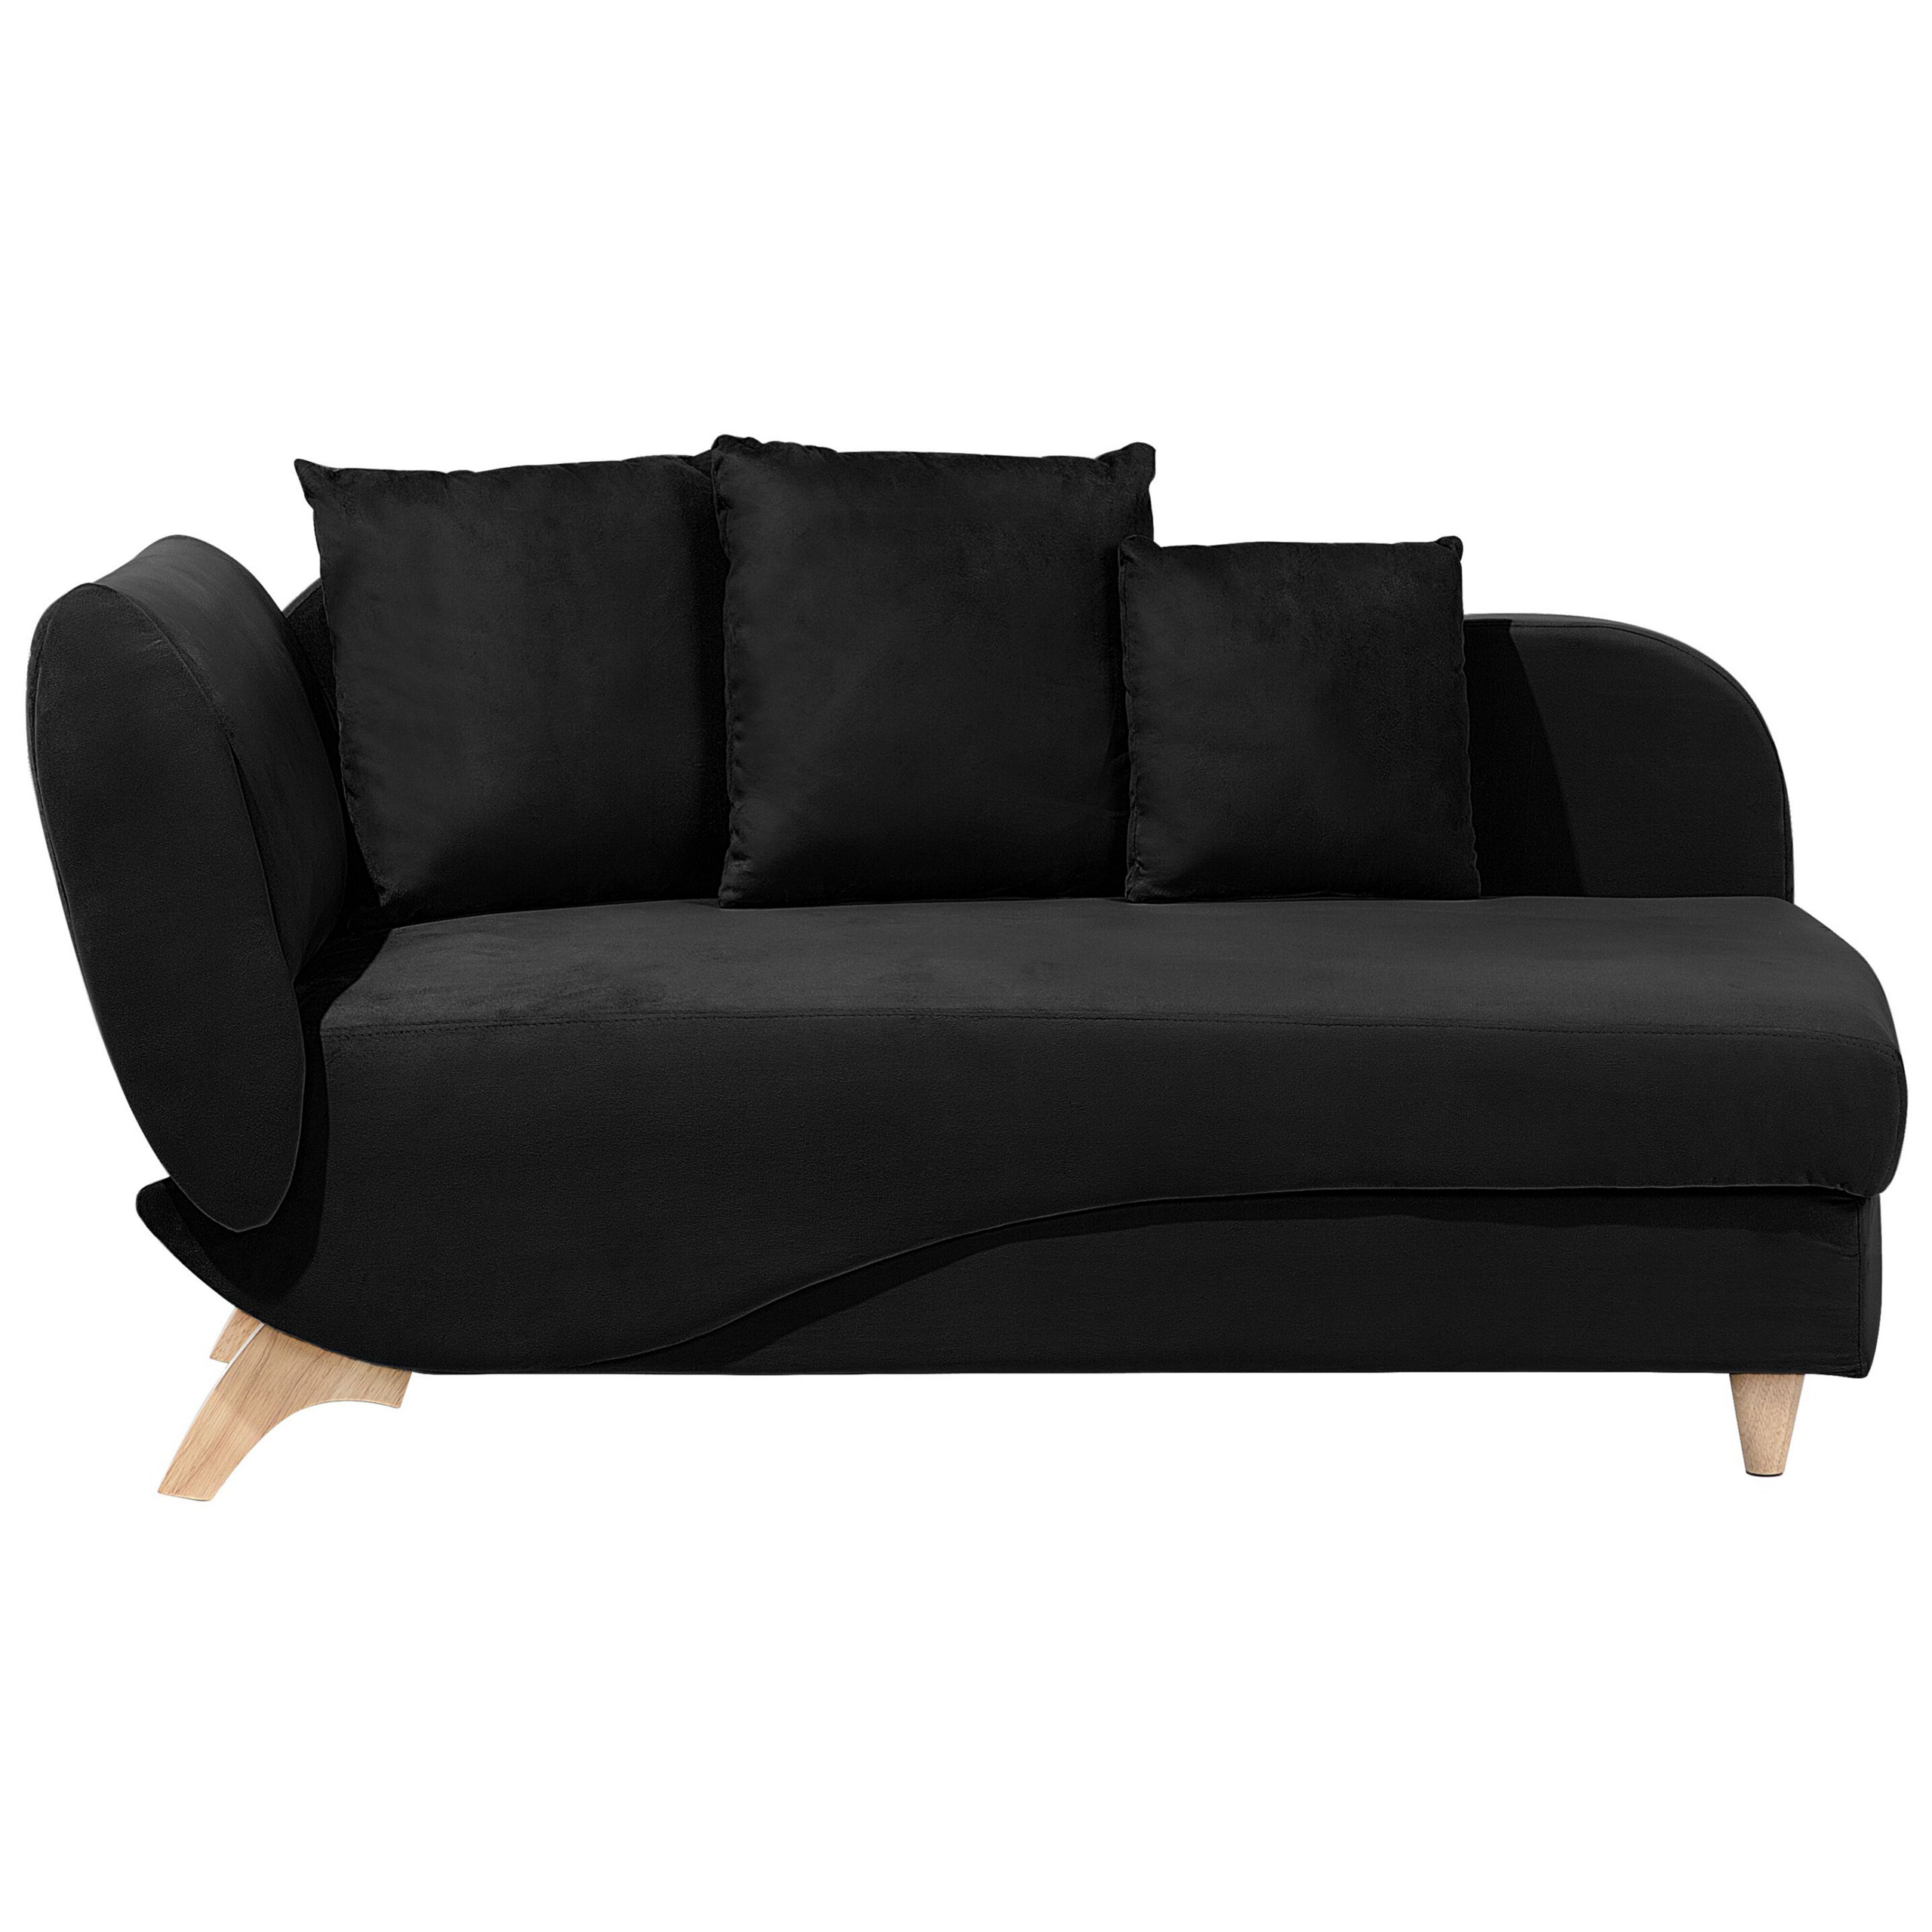 Beliani Left Hand Chaise Lounge in Black with Storage Container